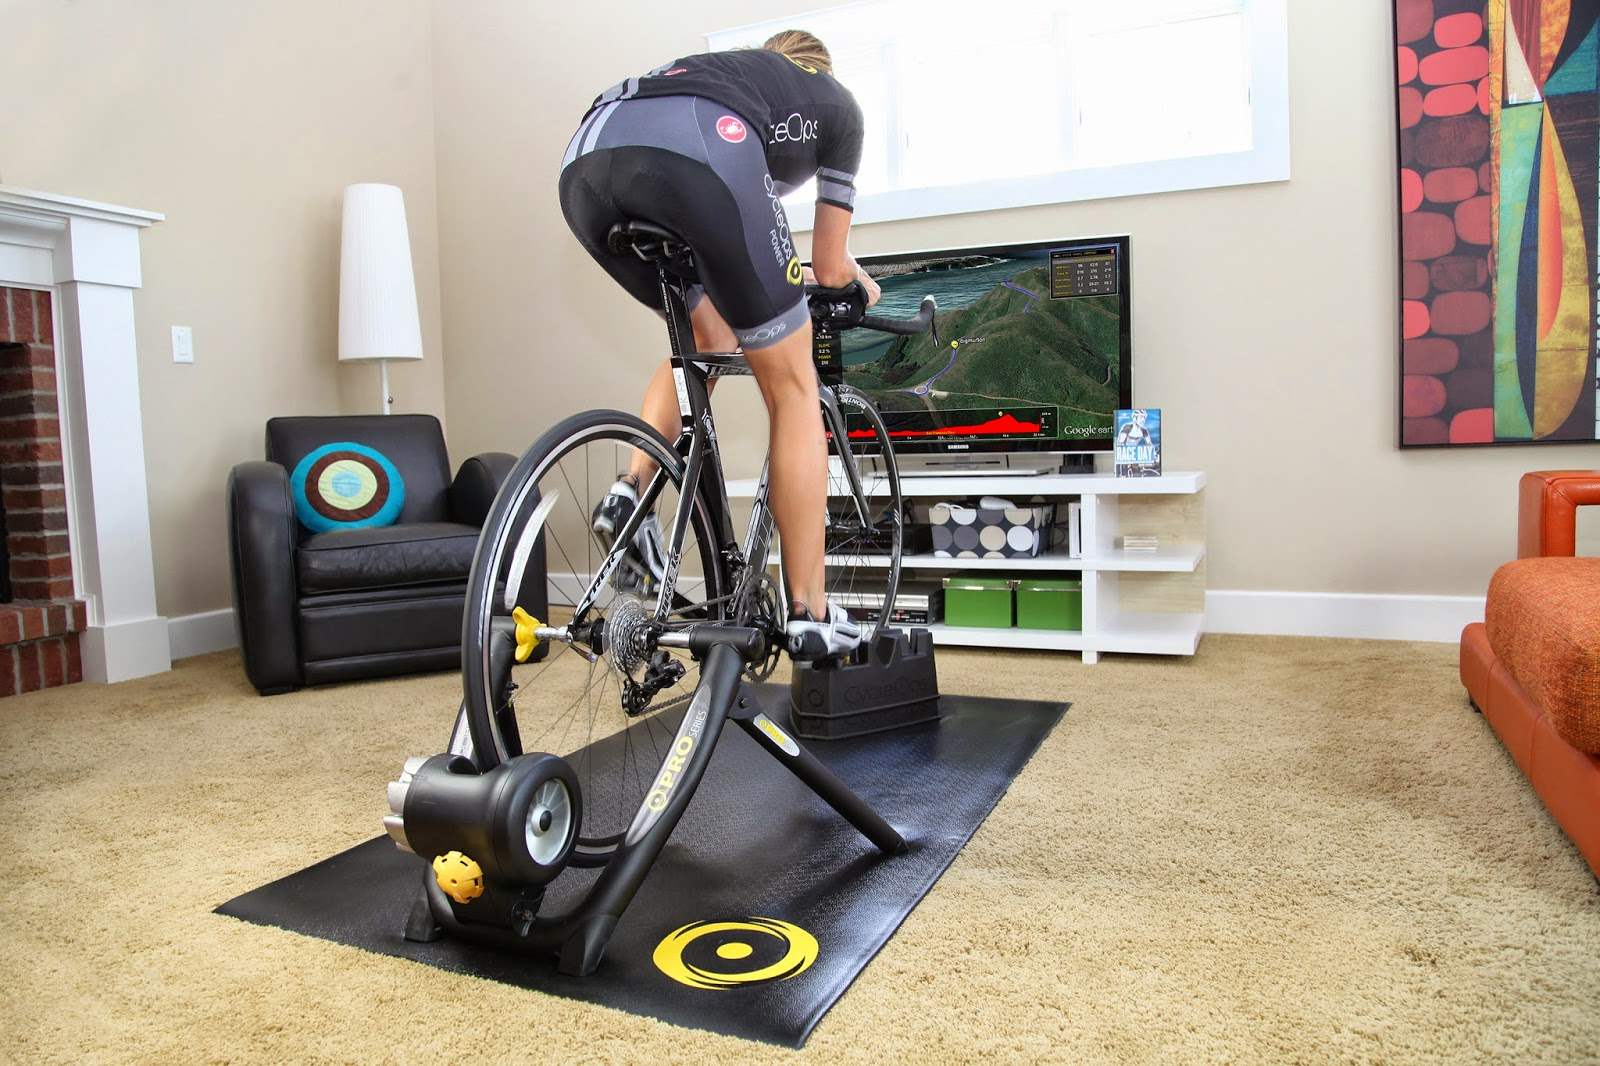 Giveaway: Showcase Your Indoor Bike Workout Room For A Chance To Win ...